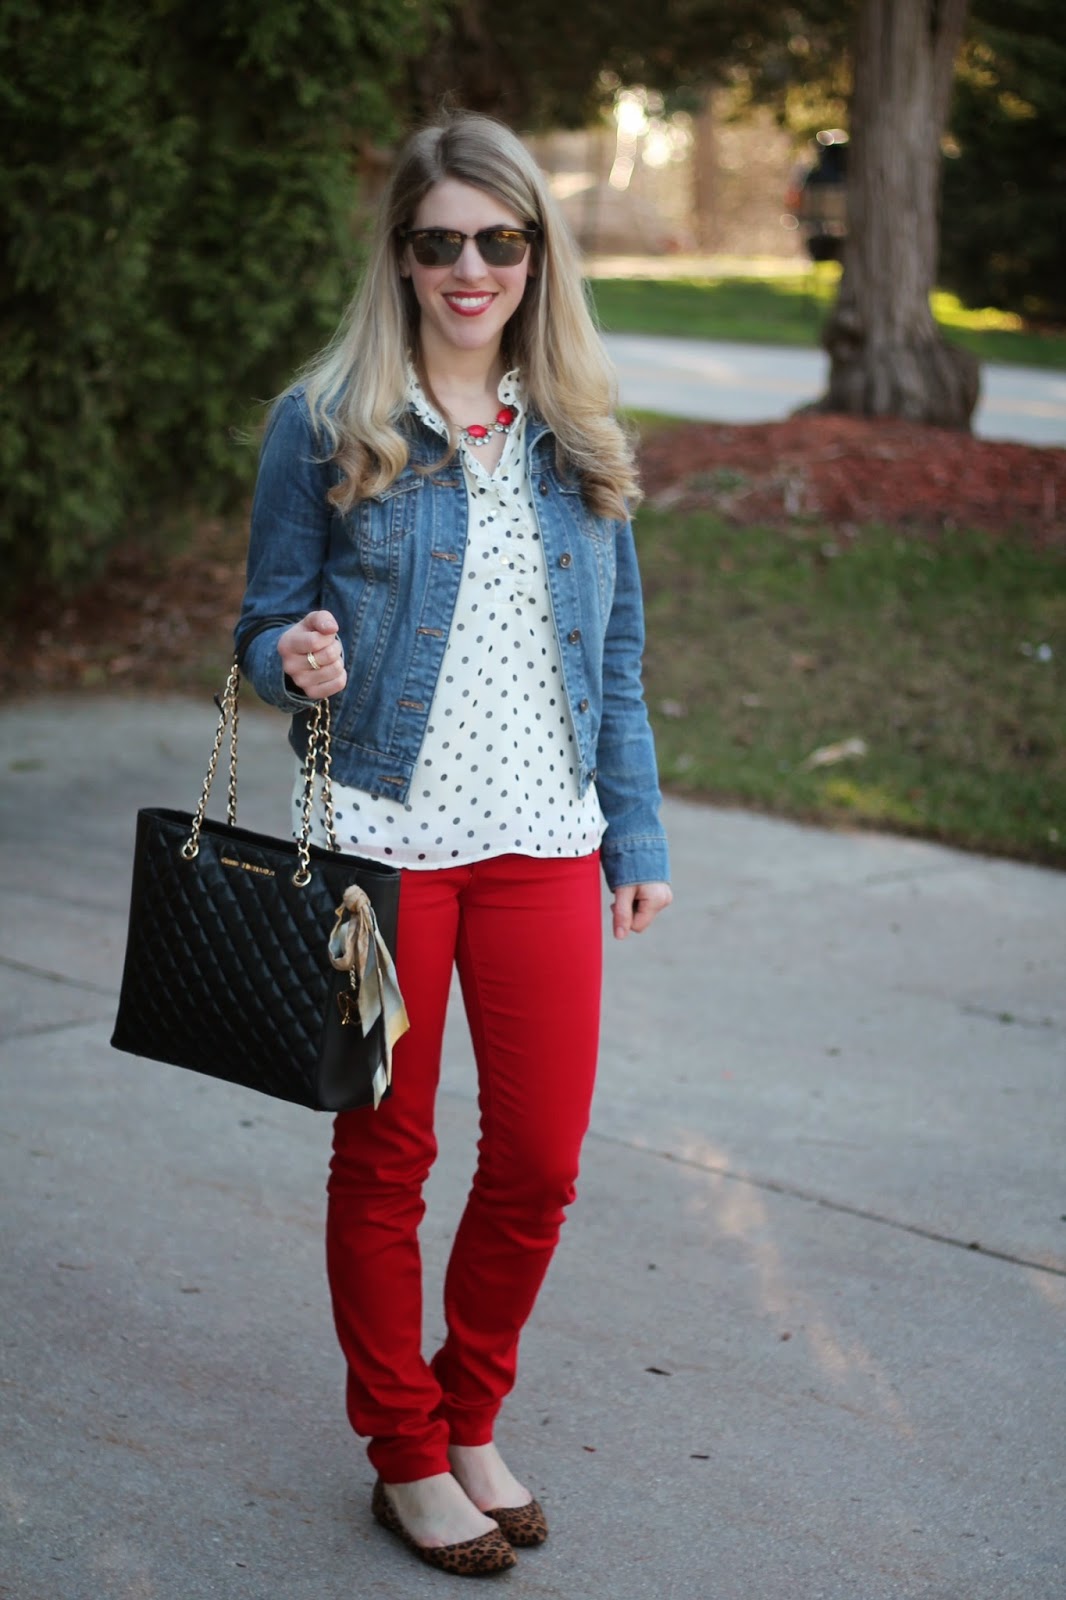 I do deClaire: Red Jeans and Polka Dot Top